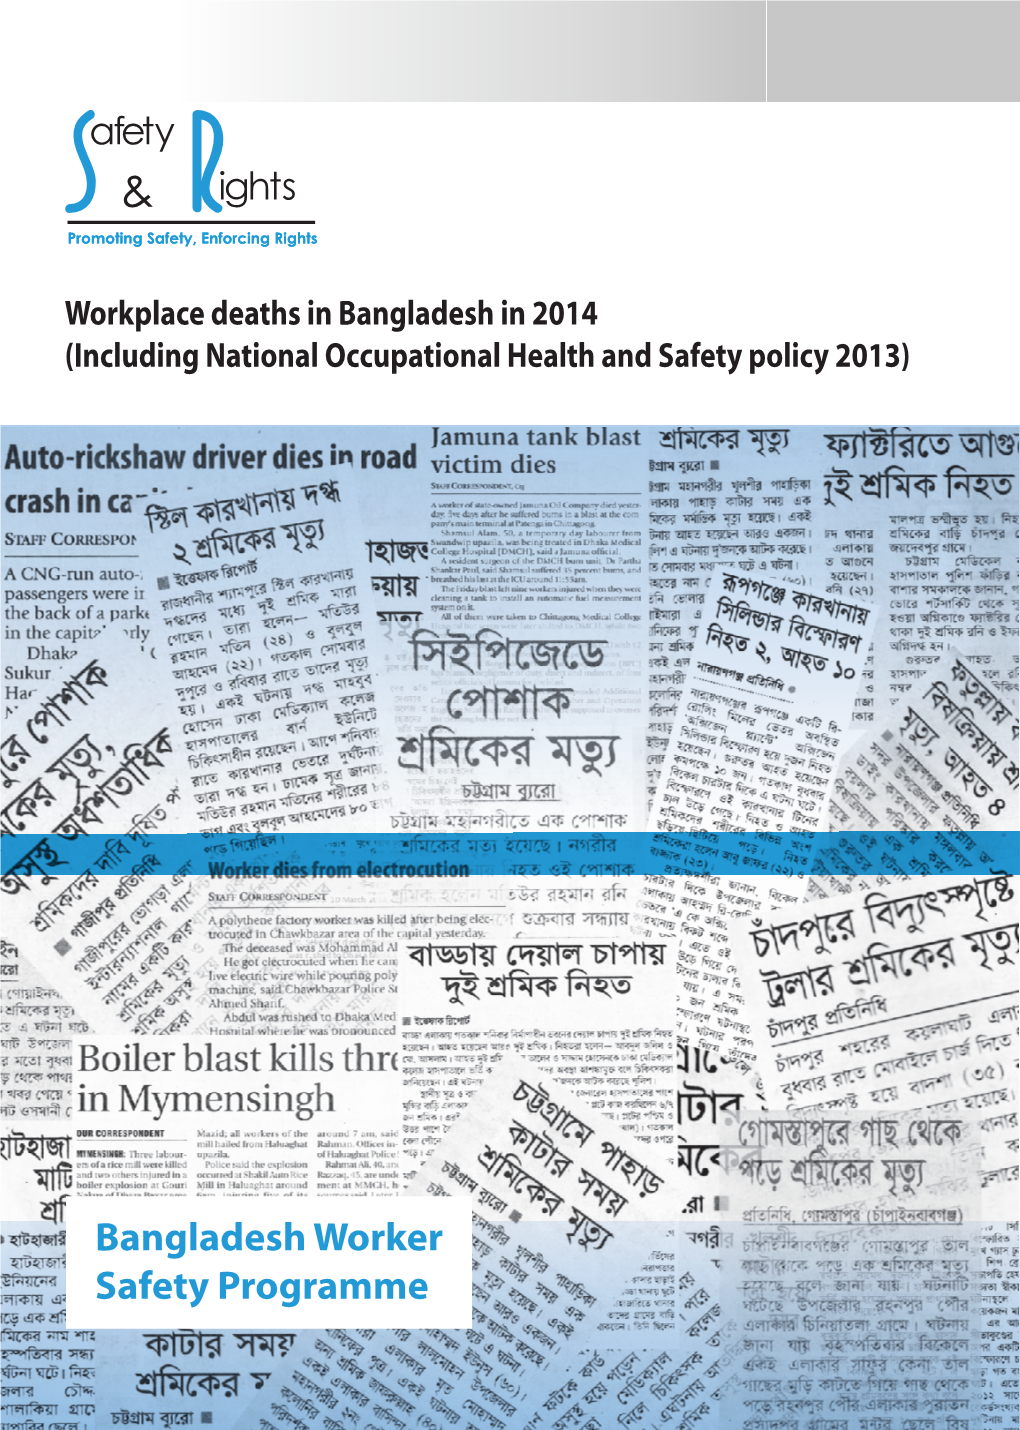 Workplace Deaths in Bangladesh in 2014 (Including National Occupational Health and Safety Policy 2013)